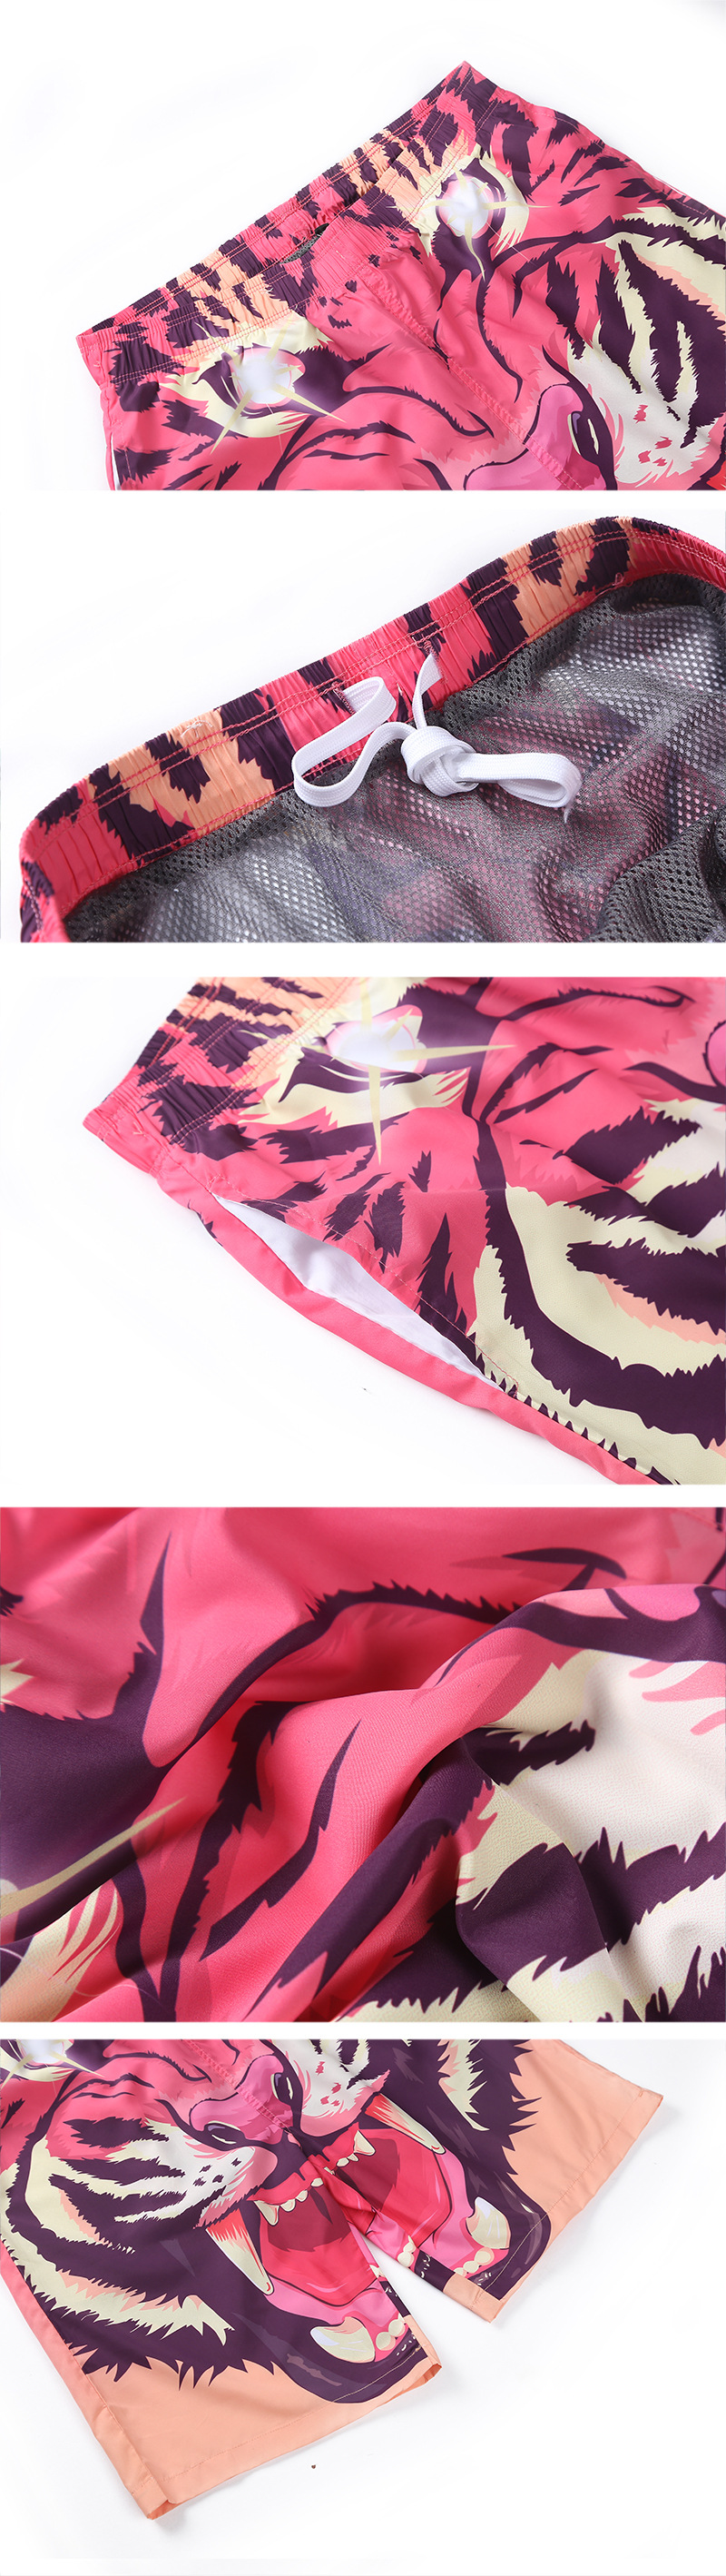 3D-Tiger-Printing-Pattern-Casual-Beach-Quick-Drying-Board-Shorts-for-Men-1264884